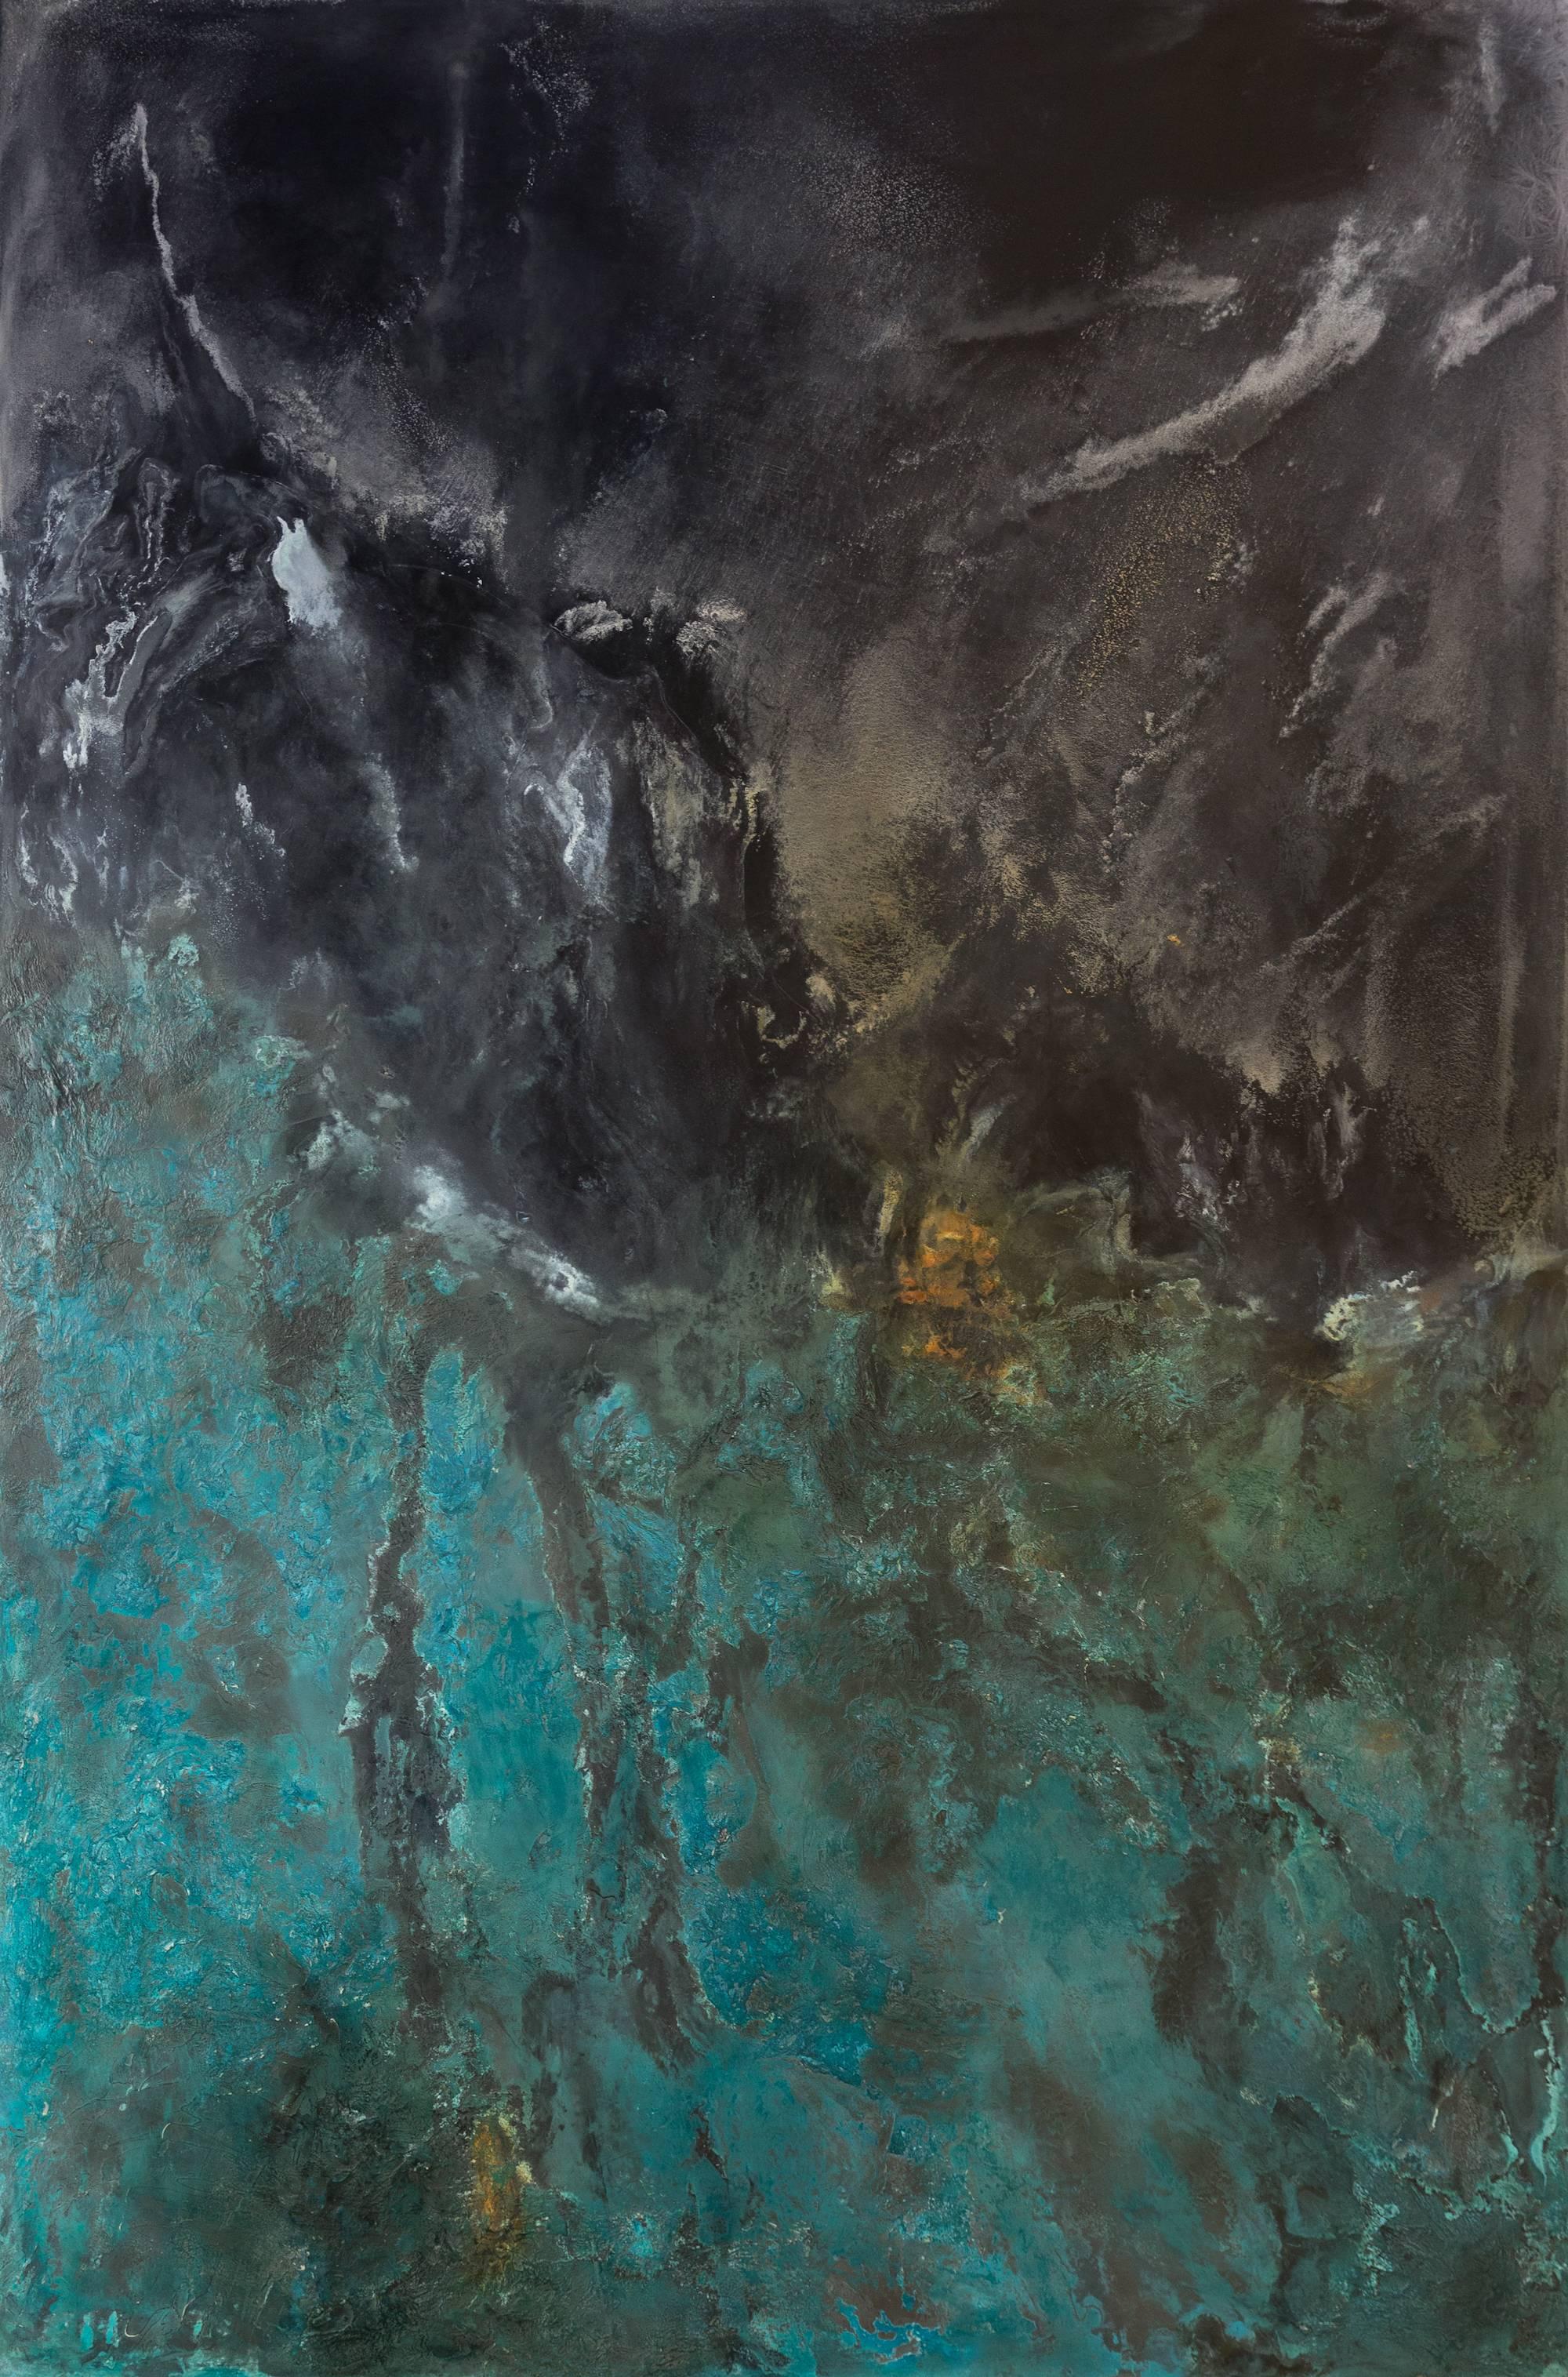 Untitled CIX is a large-scale painting by French contemporary artist Frédérique Domergue.
Oxidized zinc and bronze leaf on wood panelling, patina fixed with beeswax polish, 180 cm × 120 cm.
Through polishing and oxidation, Frédérique Domergue